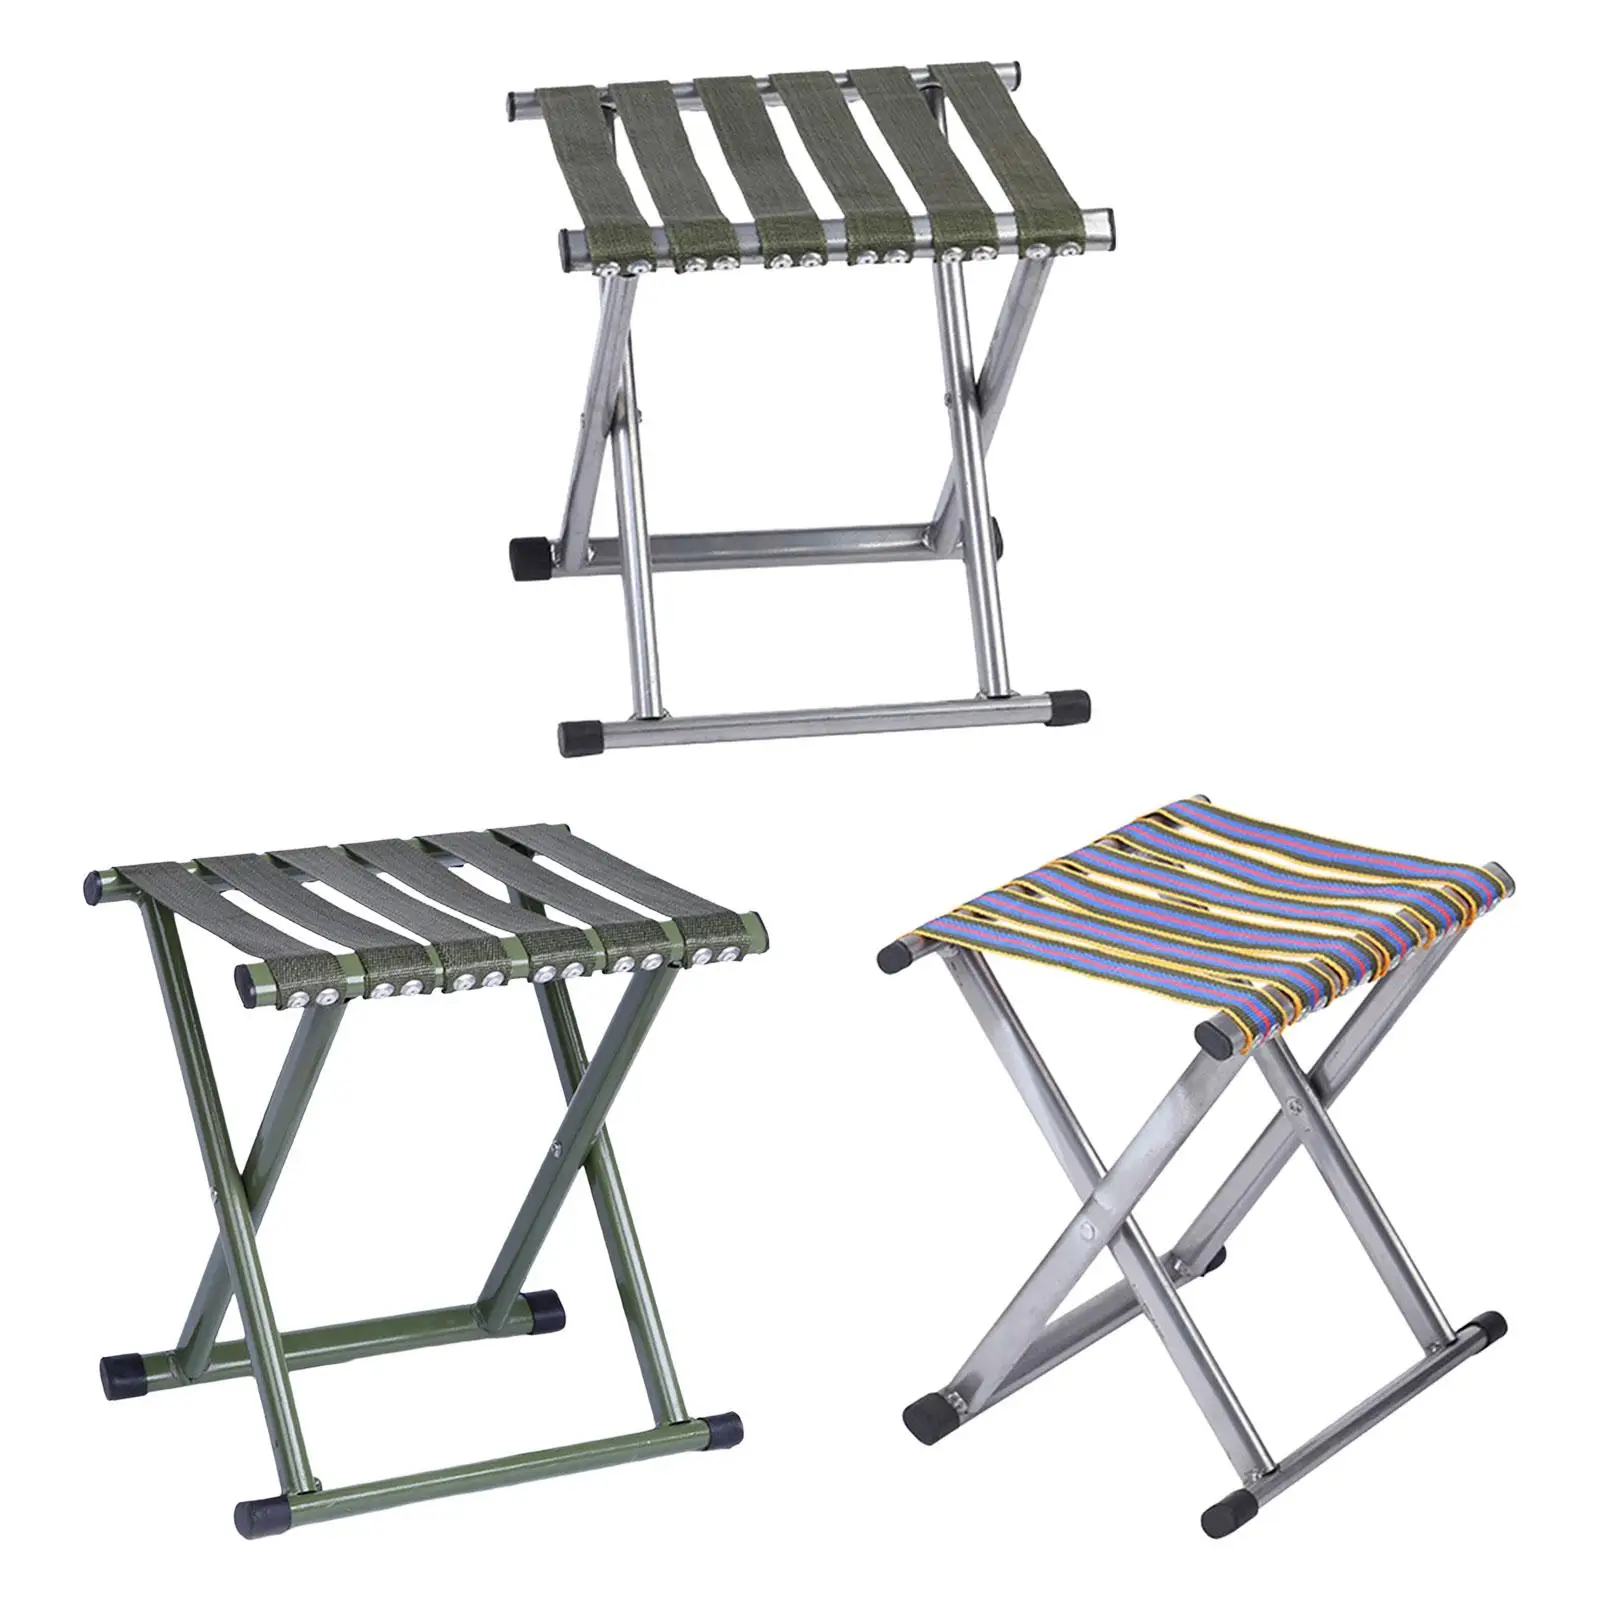 Camping Stool, Portable Folding Stool for Adults, Folding Stool for Travel,